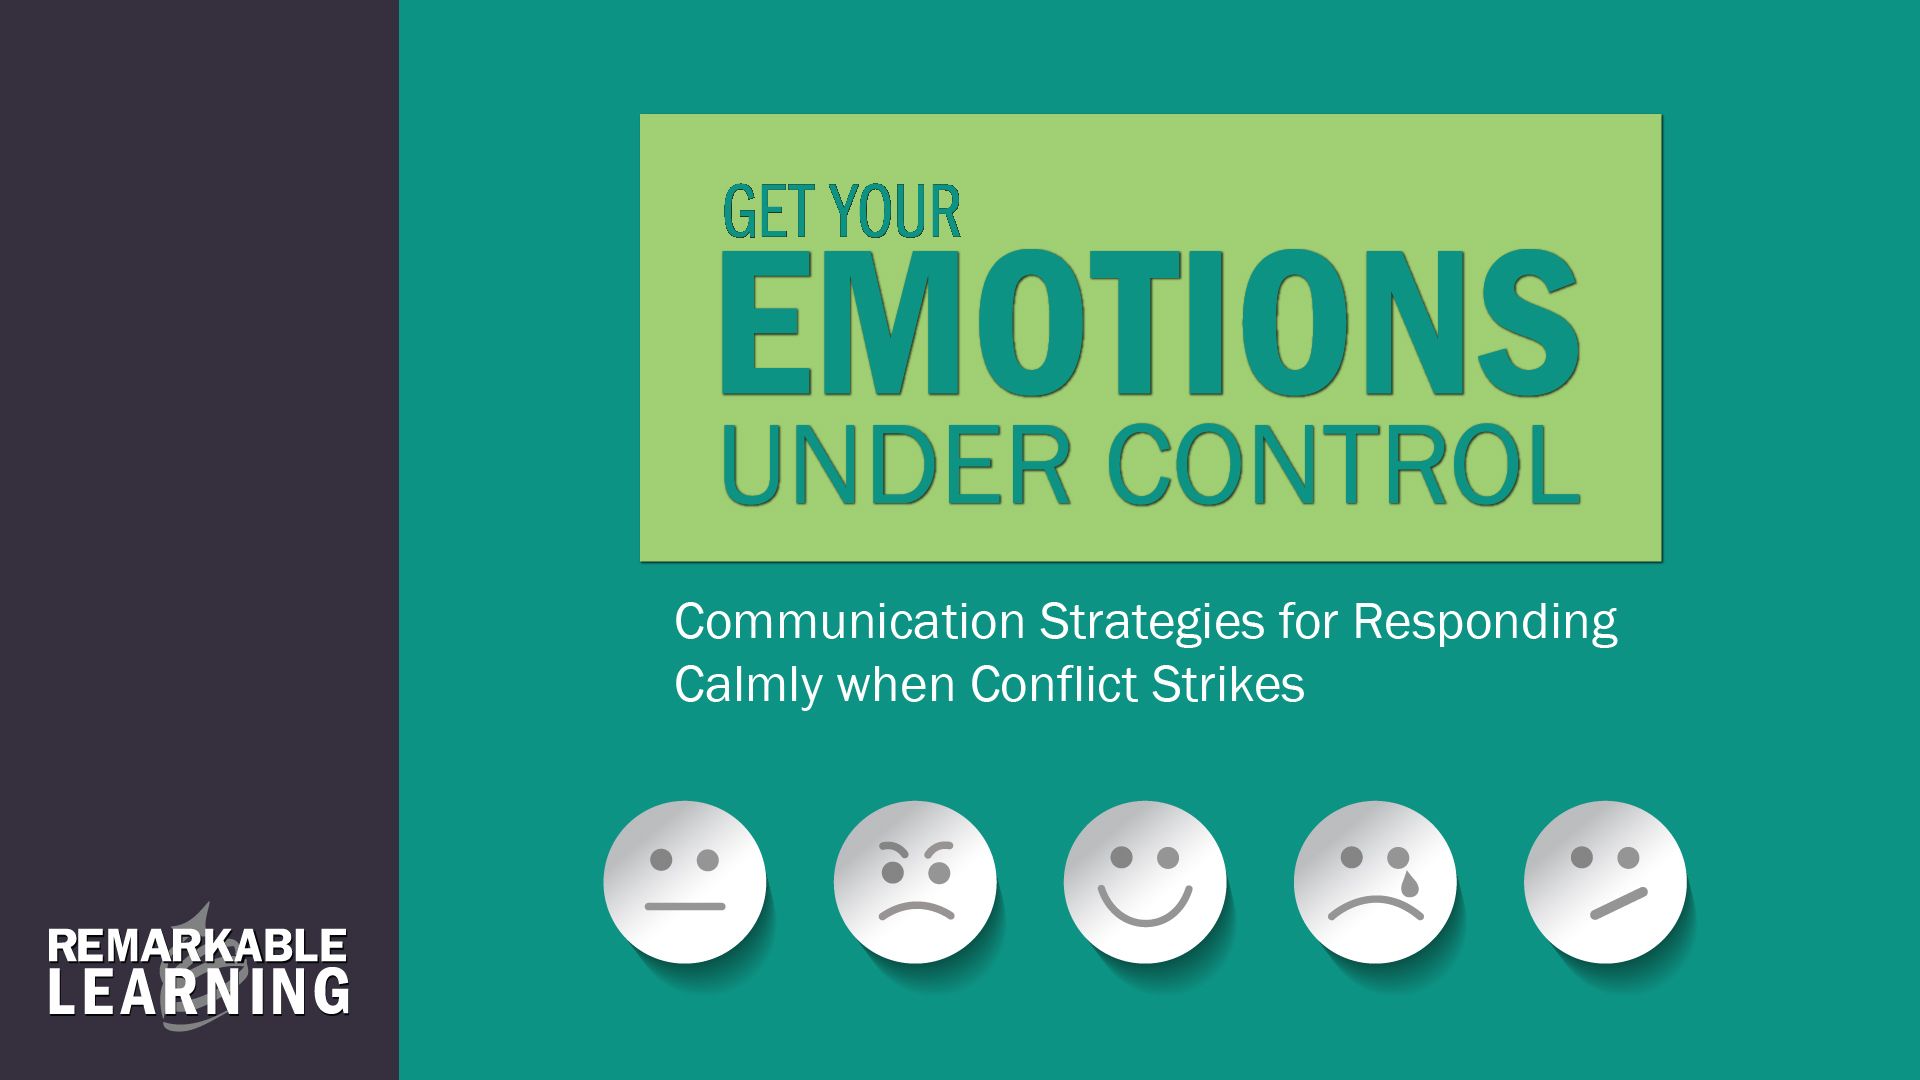 Get Your Emotions Under Control